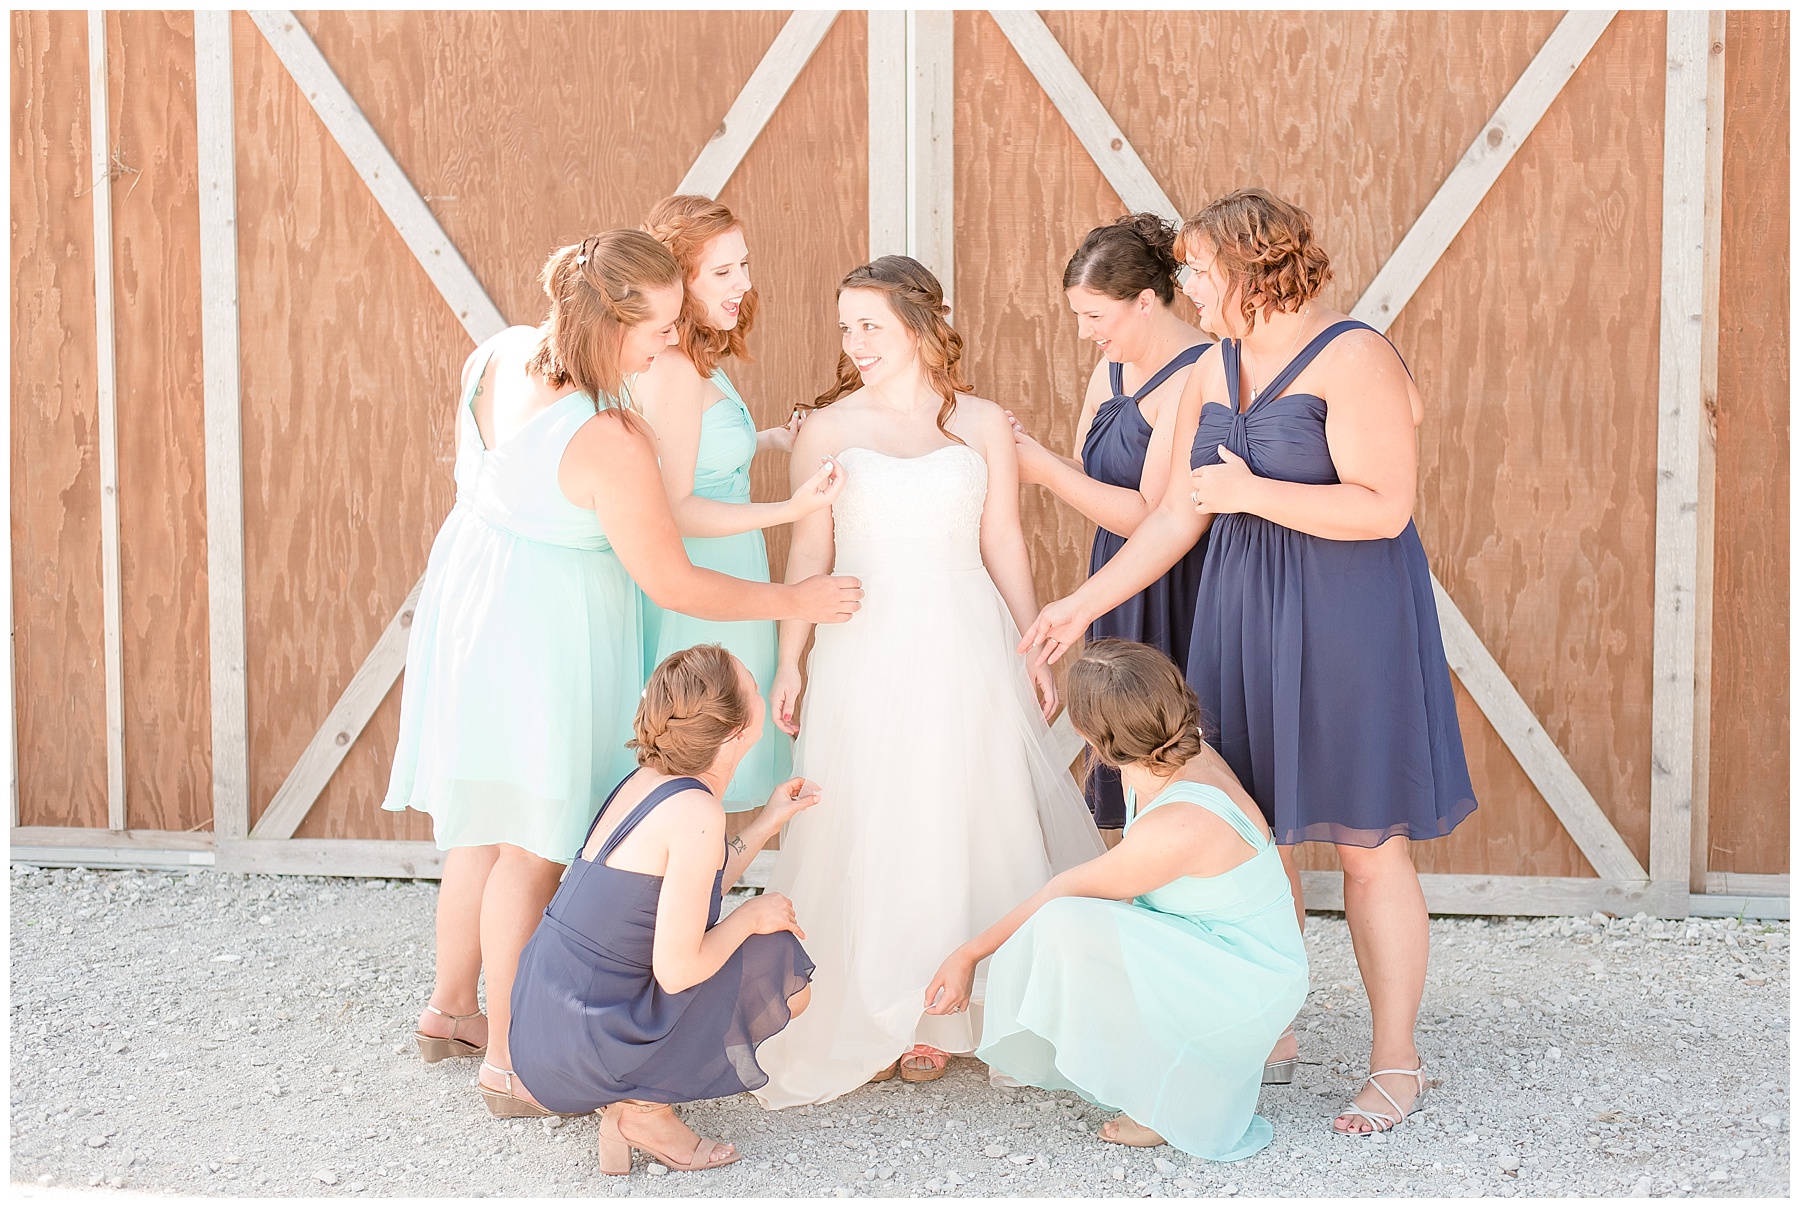 Bride surrounded by bridesmaids in navy and teal bridesmaids dresses in the 2018 wedding photography favorites